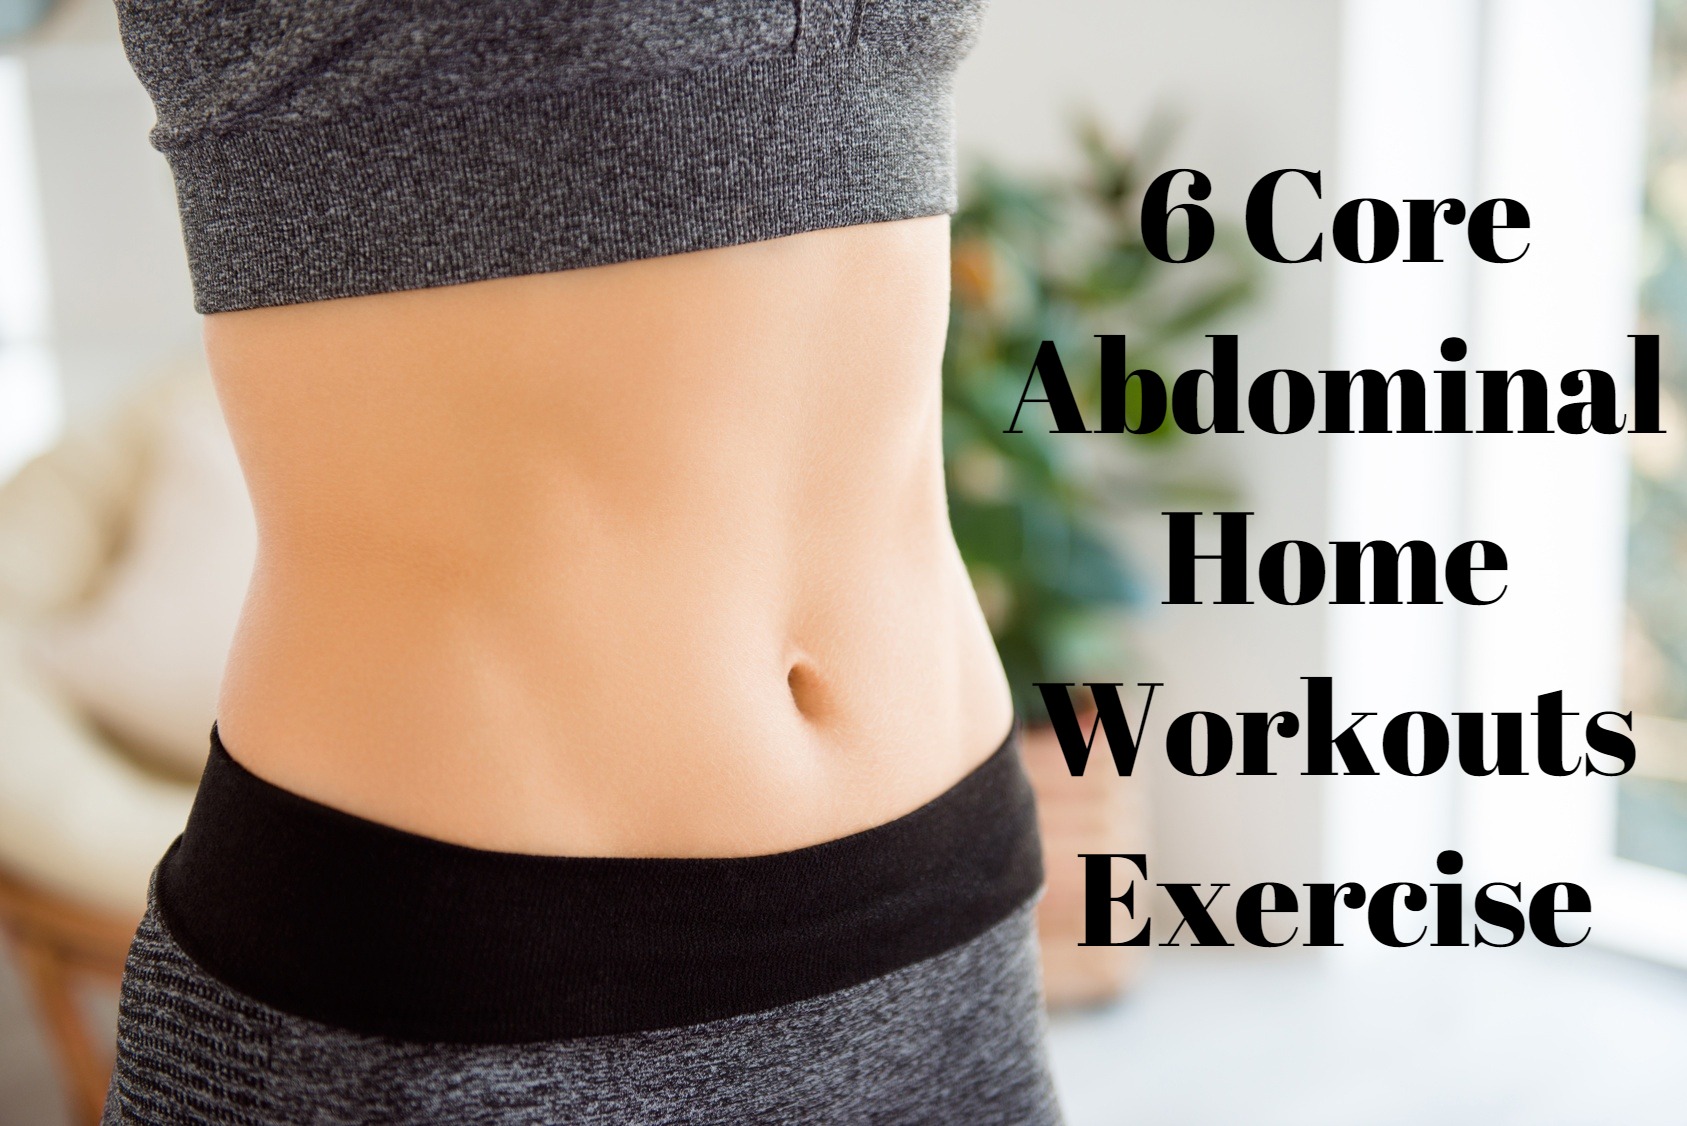 Abdominal Home Workouts